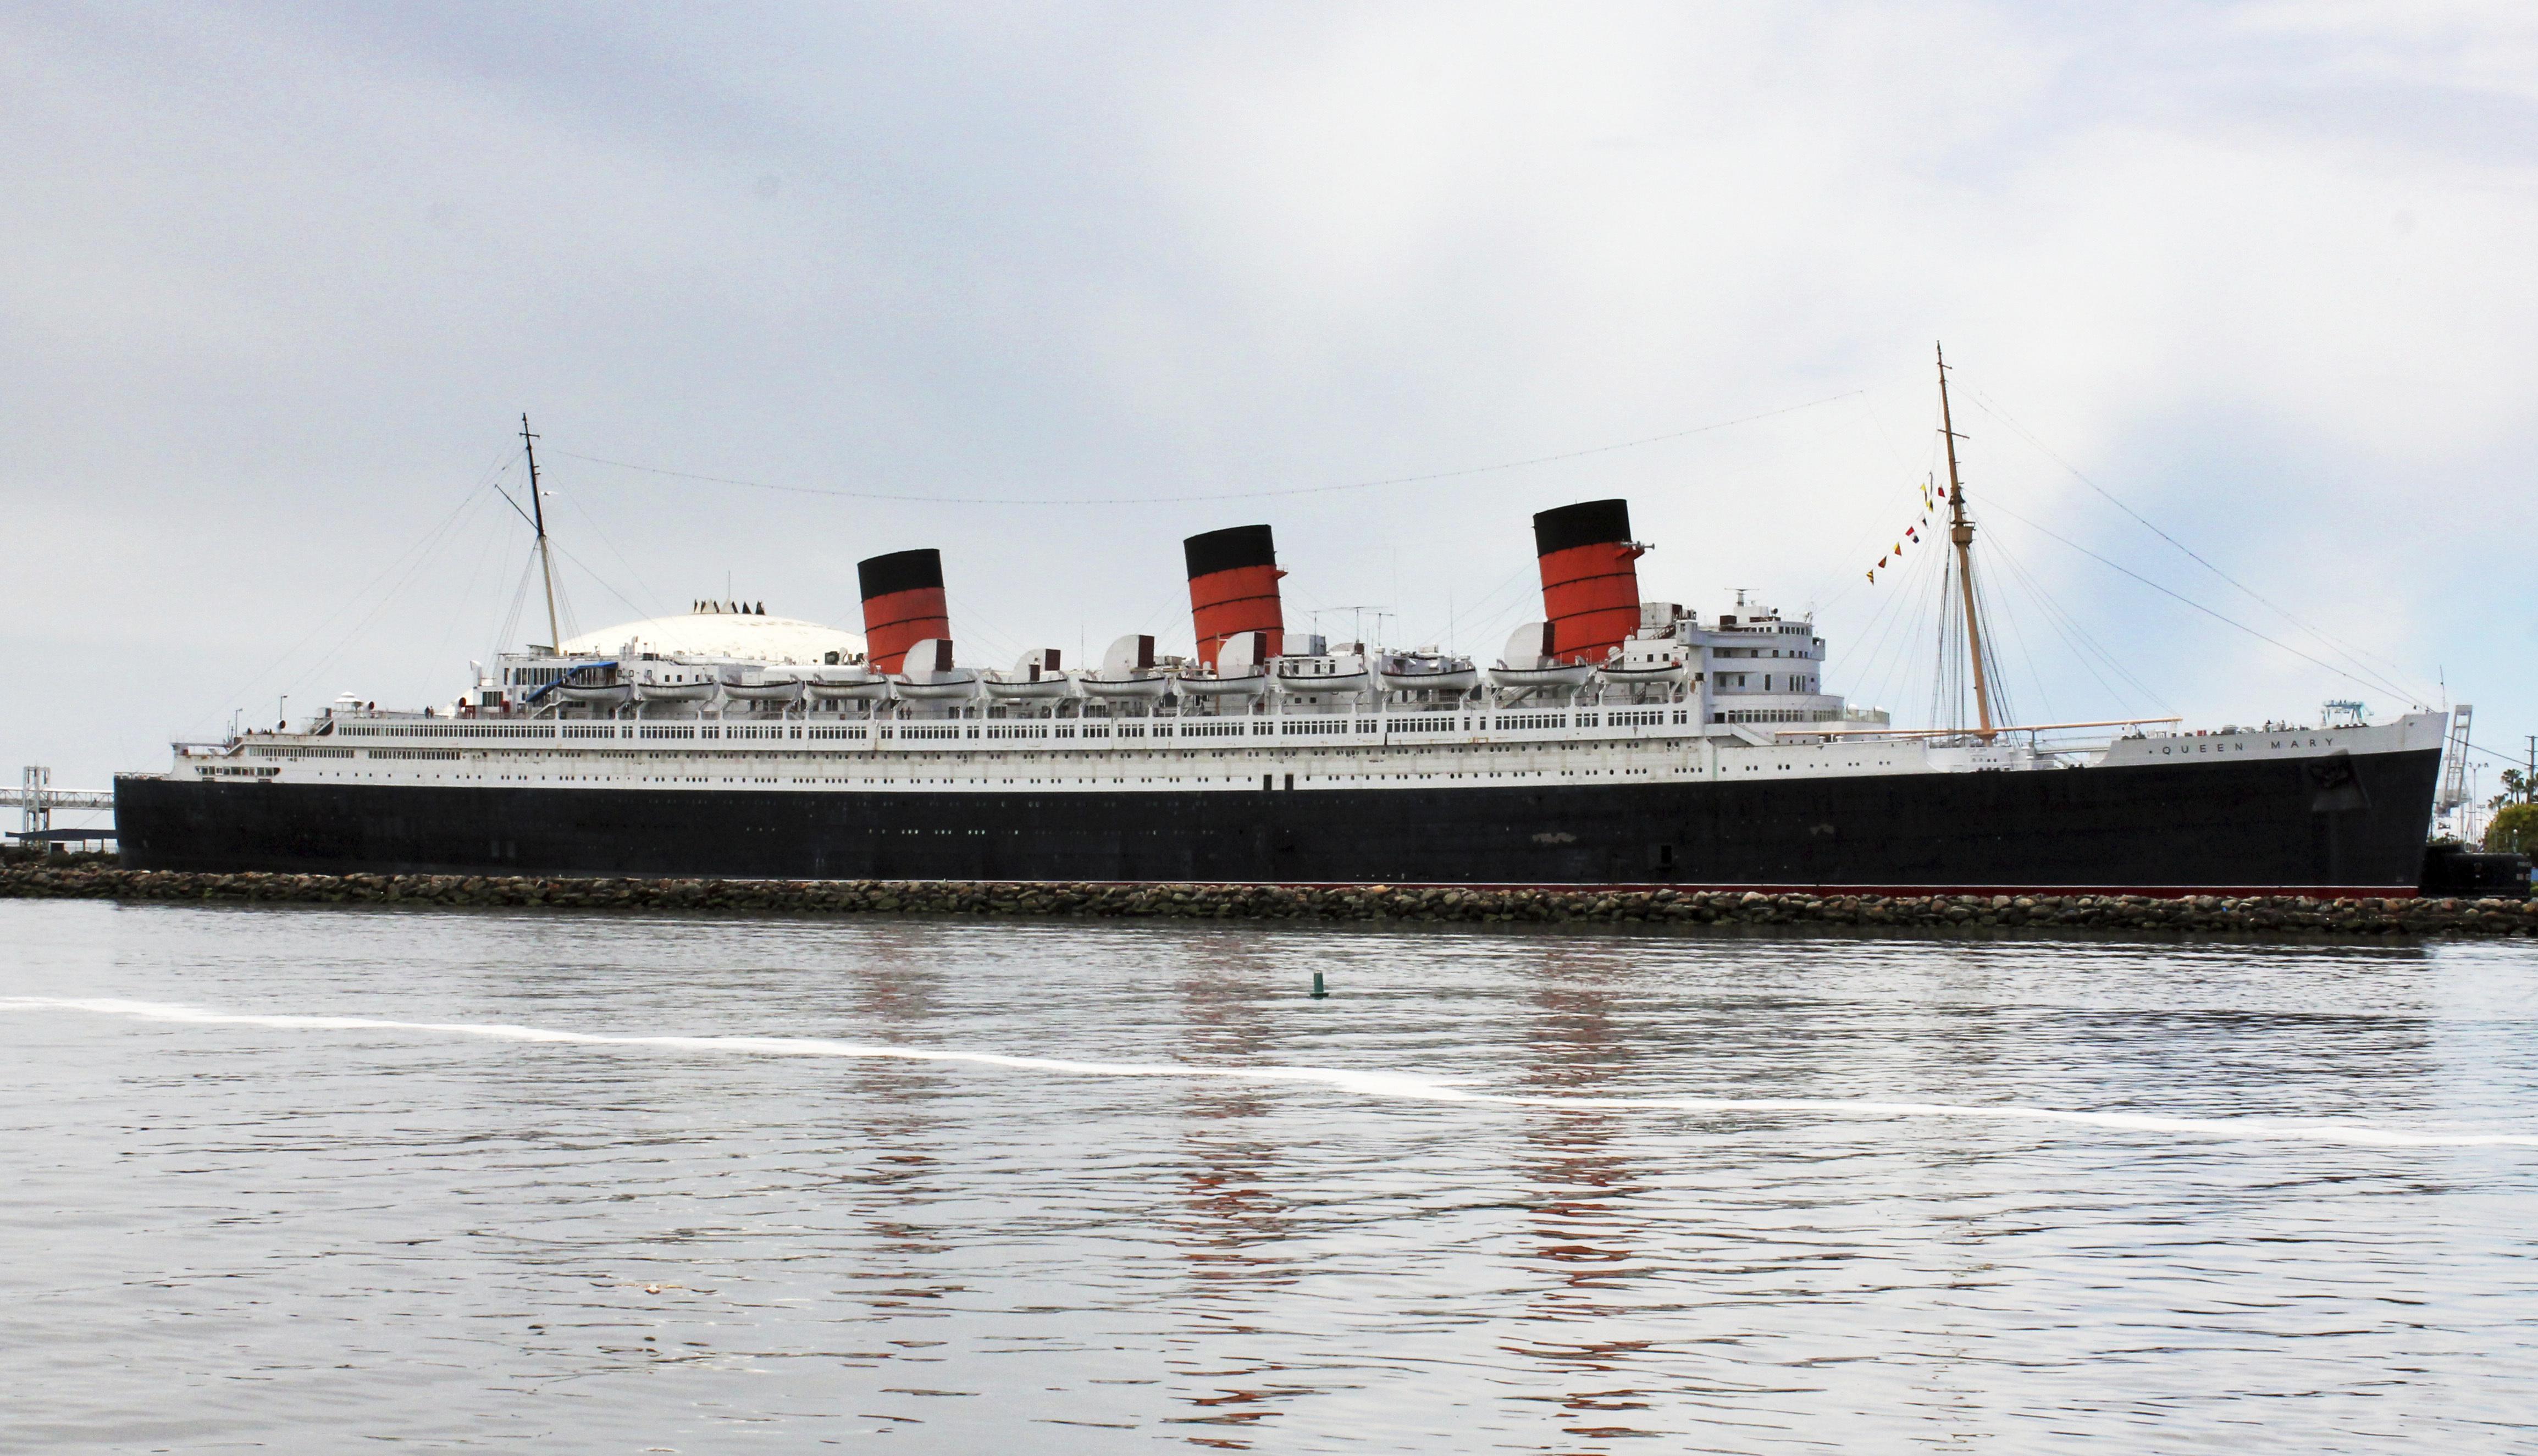 Survey Queen Mary severely rusted, could cost 300M to fix The